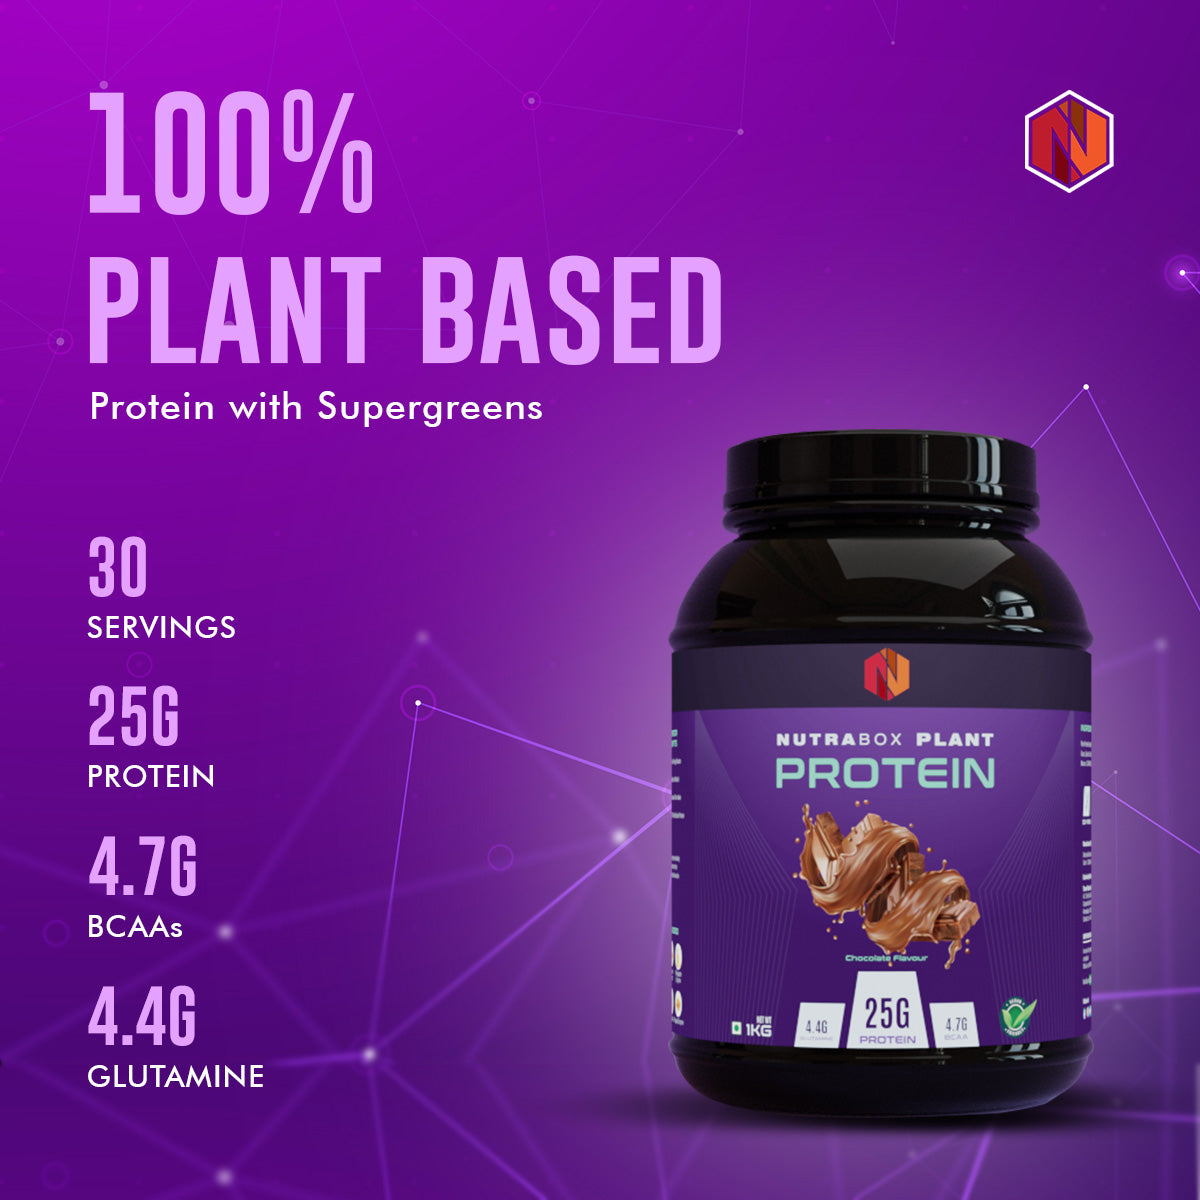 Nutrabox 100% Plant based protein 1kg (25 grams Protein per serving)